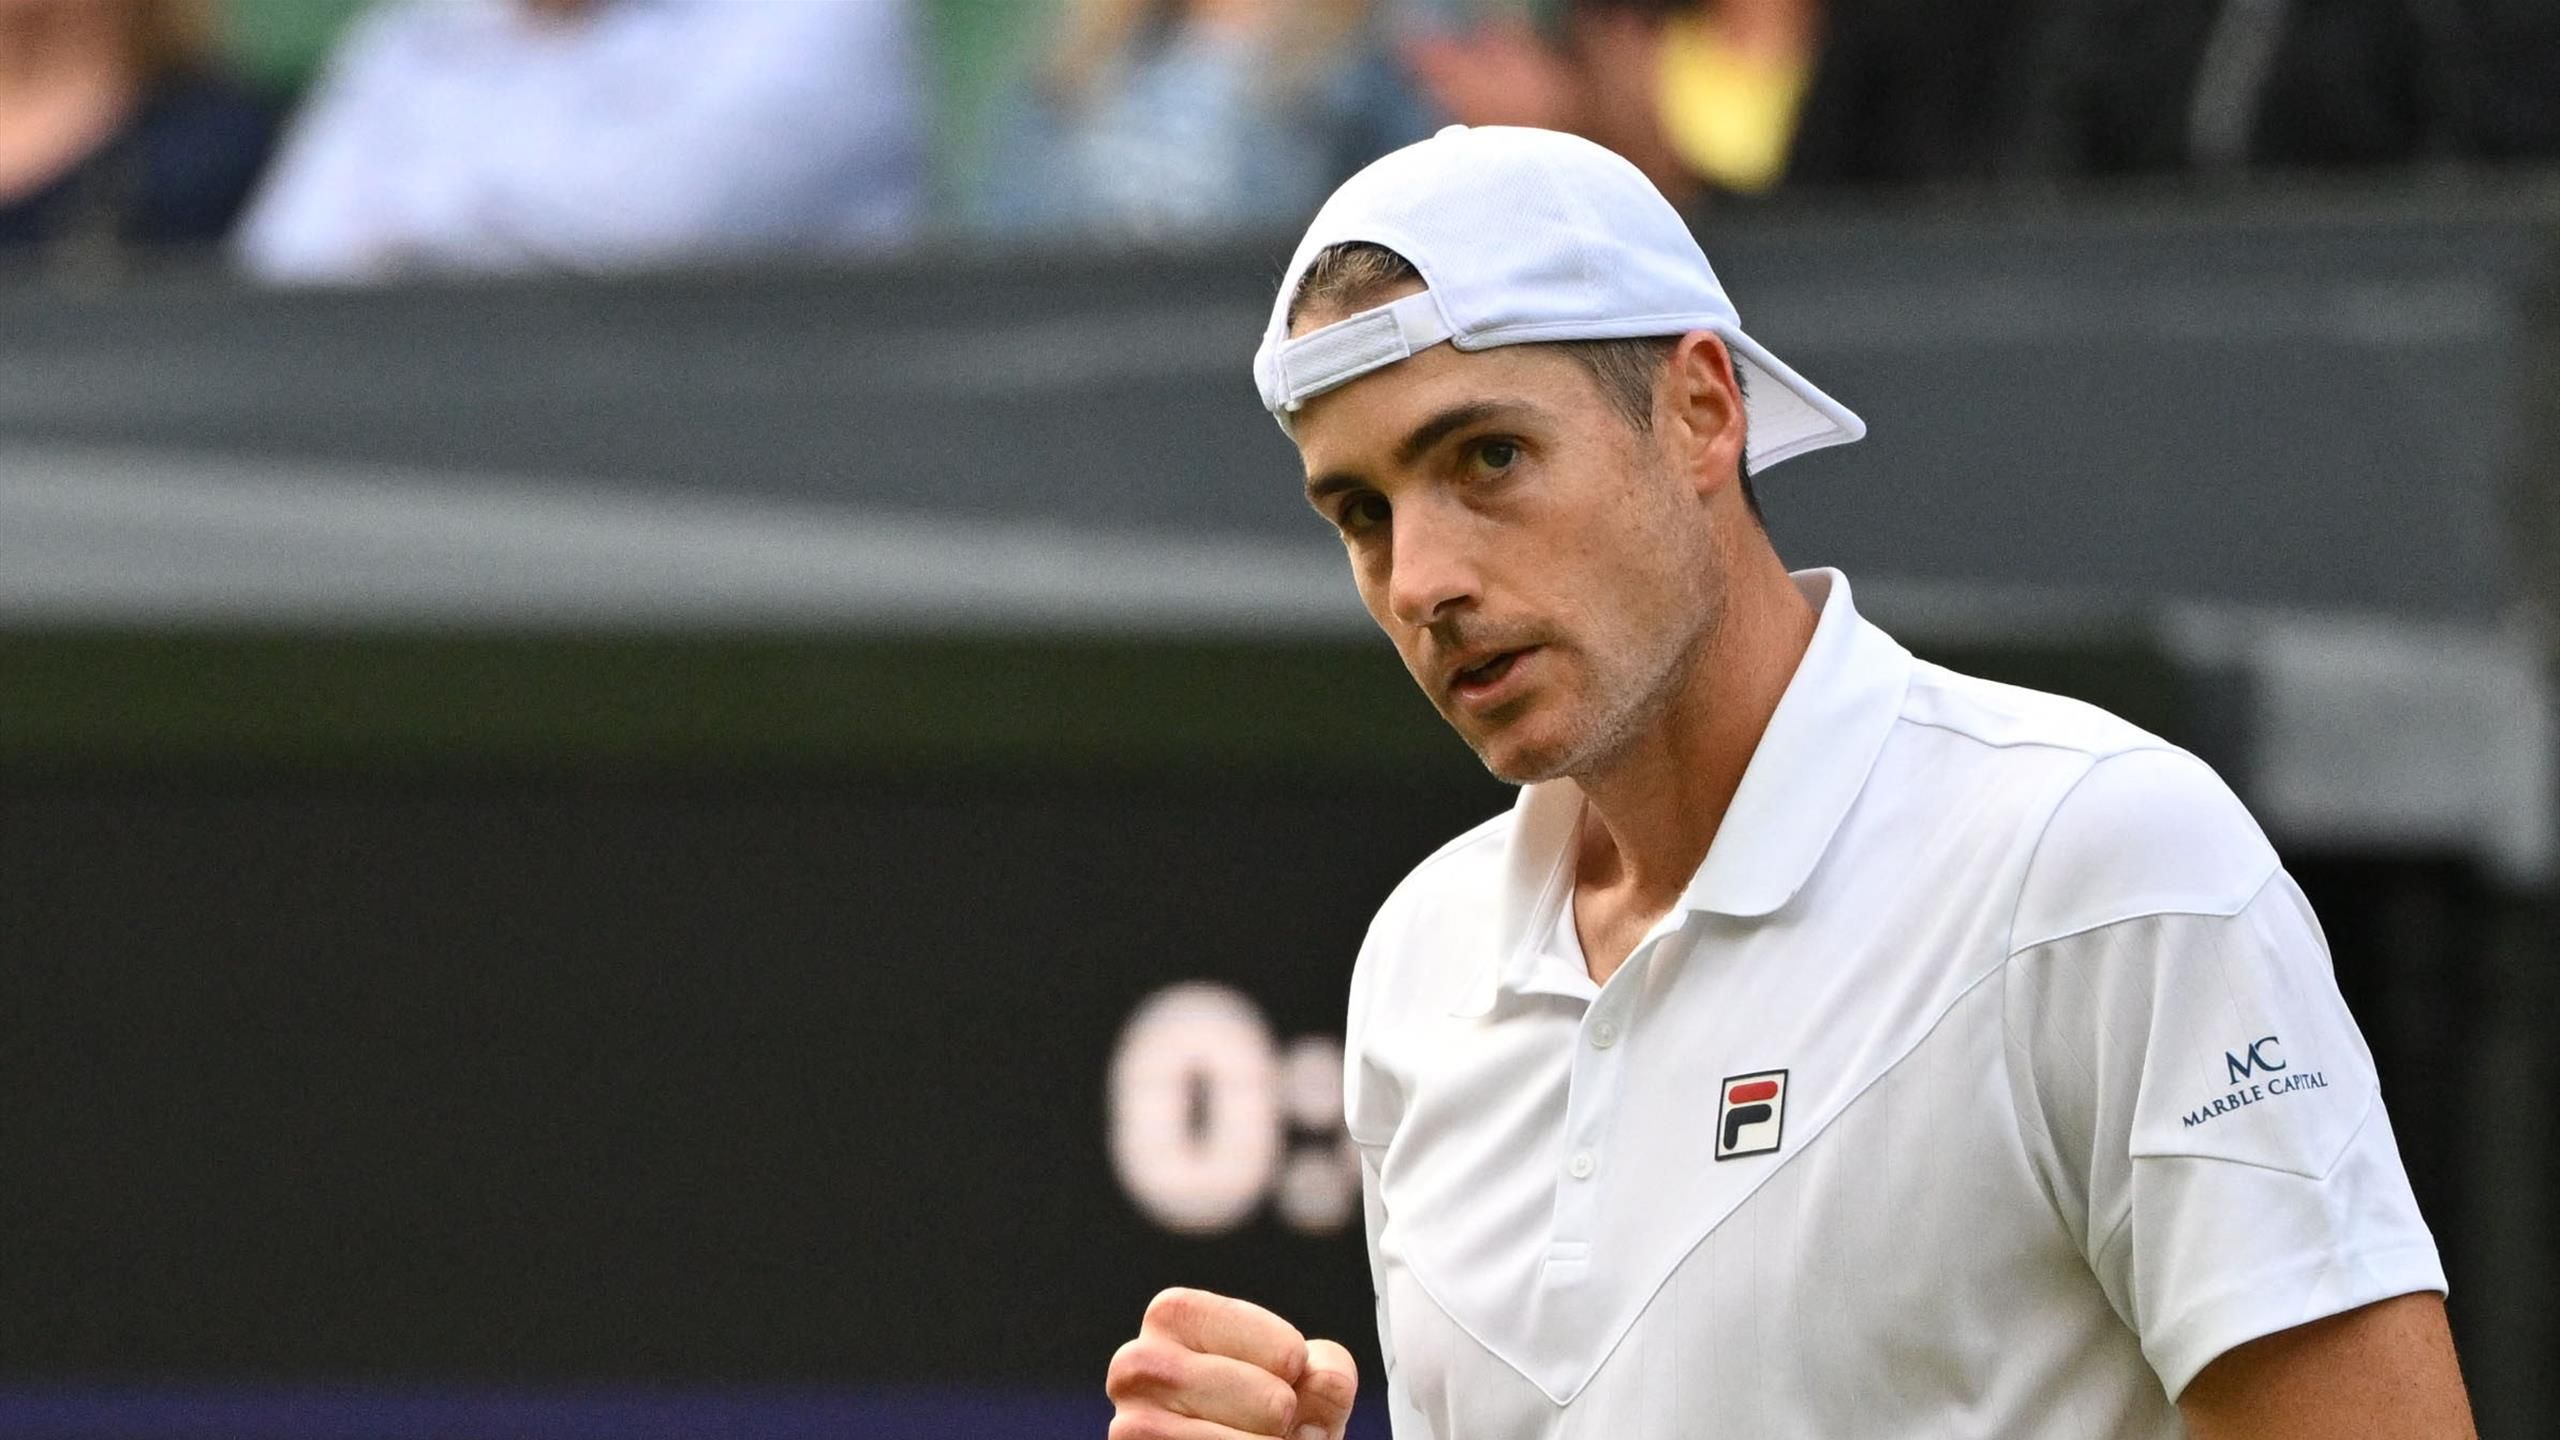 Wimbledon 2022 - Andy Murray out as John Isner progresses in style with impressive victory on Centre Court